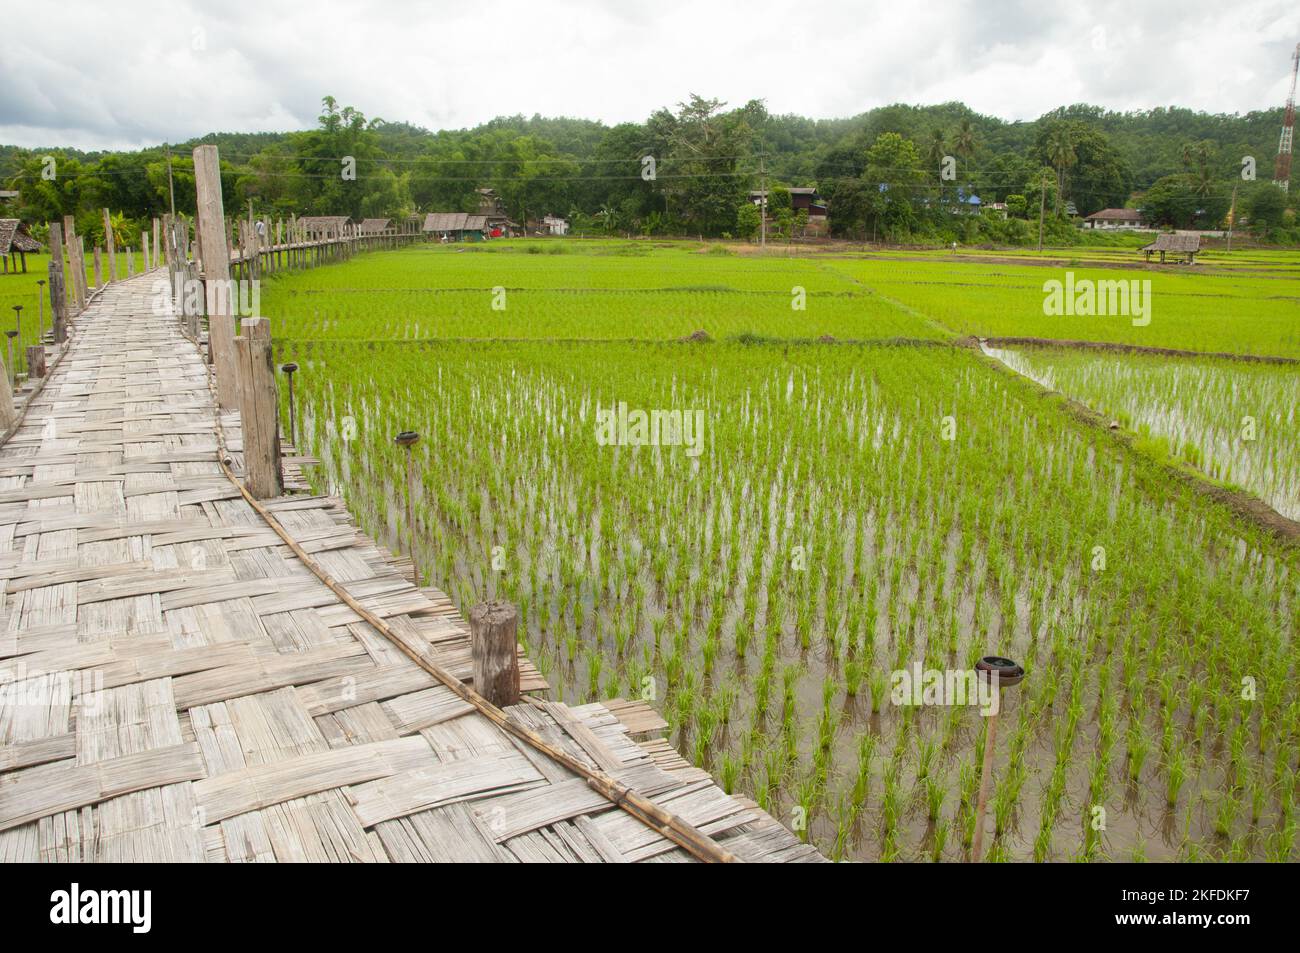 Thailand: Newly planted rice in the fields next to the Su Tong Pae Bamboo Bridge, Wat Phu Sama, Mae Hong Son. The bamboo bridge stretches 500 metres across the Mae Sa Nga stream and ricefields. The bridge allows monks access from Wat Phu Sama to the small village to the west. Stock Photo